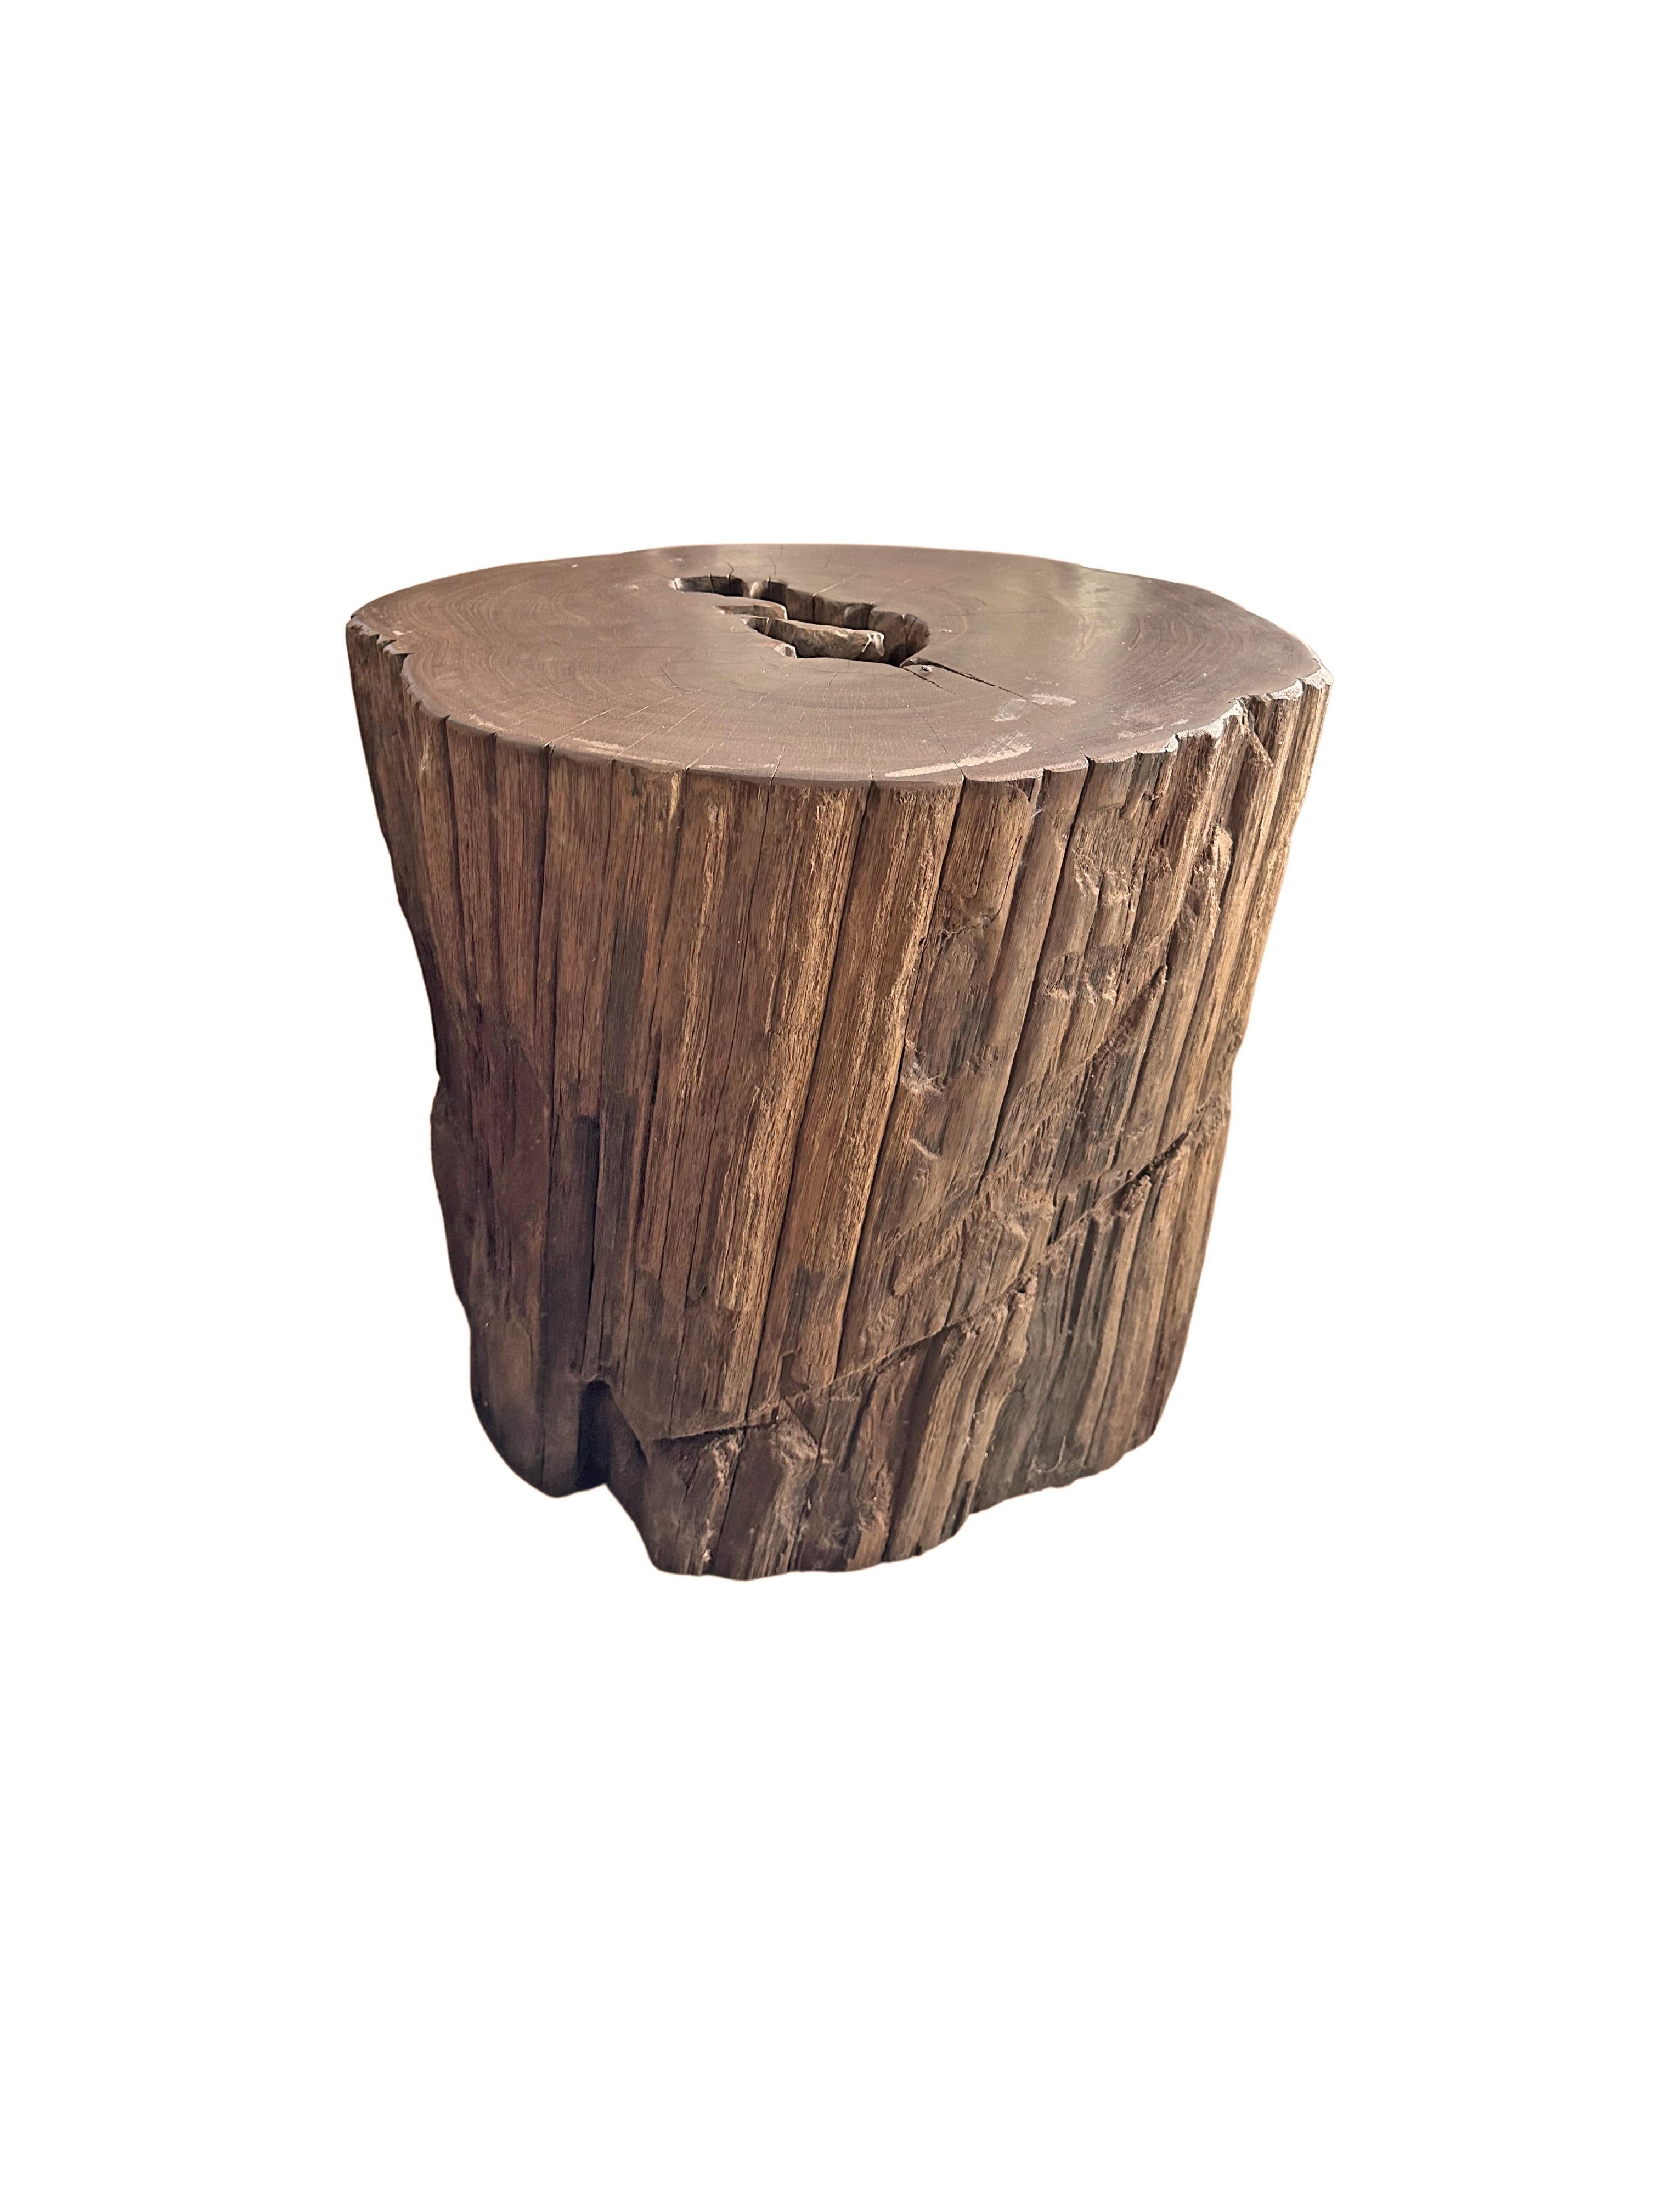 Other Raw Organic Solid Iron Wood Side Table